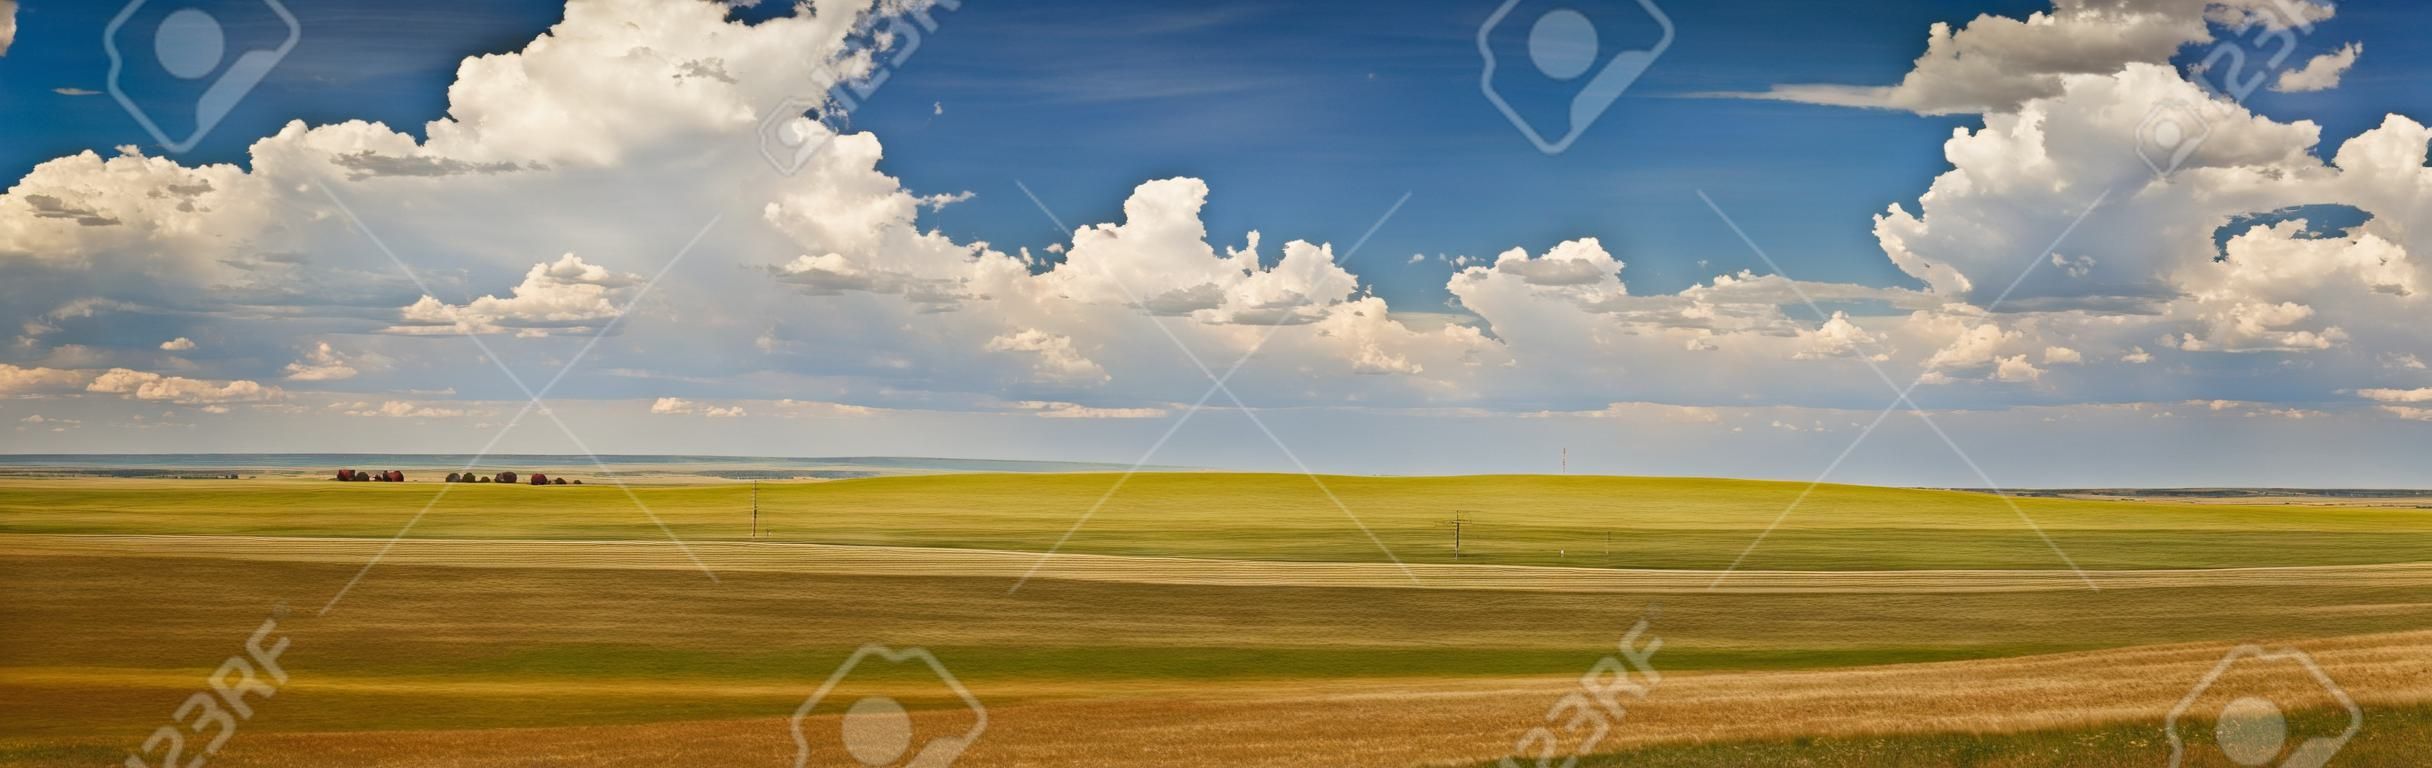 Sunny Day with Clouds Over the Great Plains in South Dakota